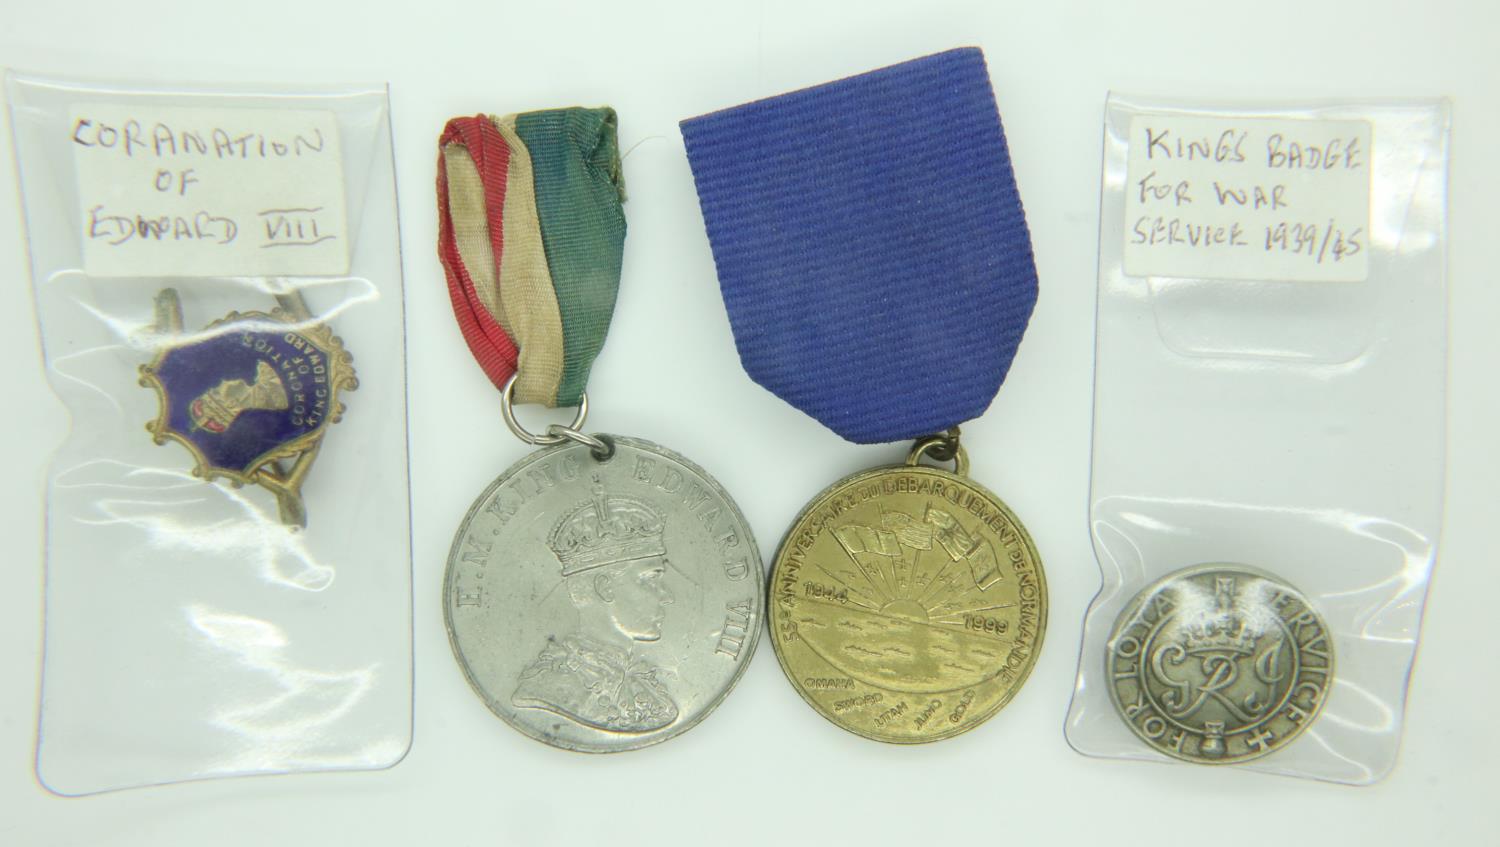 Edward VIII commemorative medal and enamelled badge, a further medal and a WWII War Service